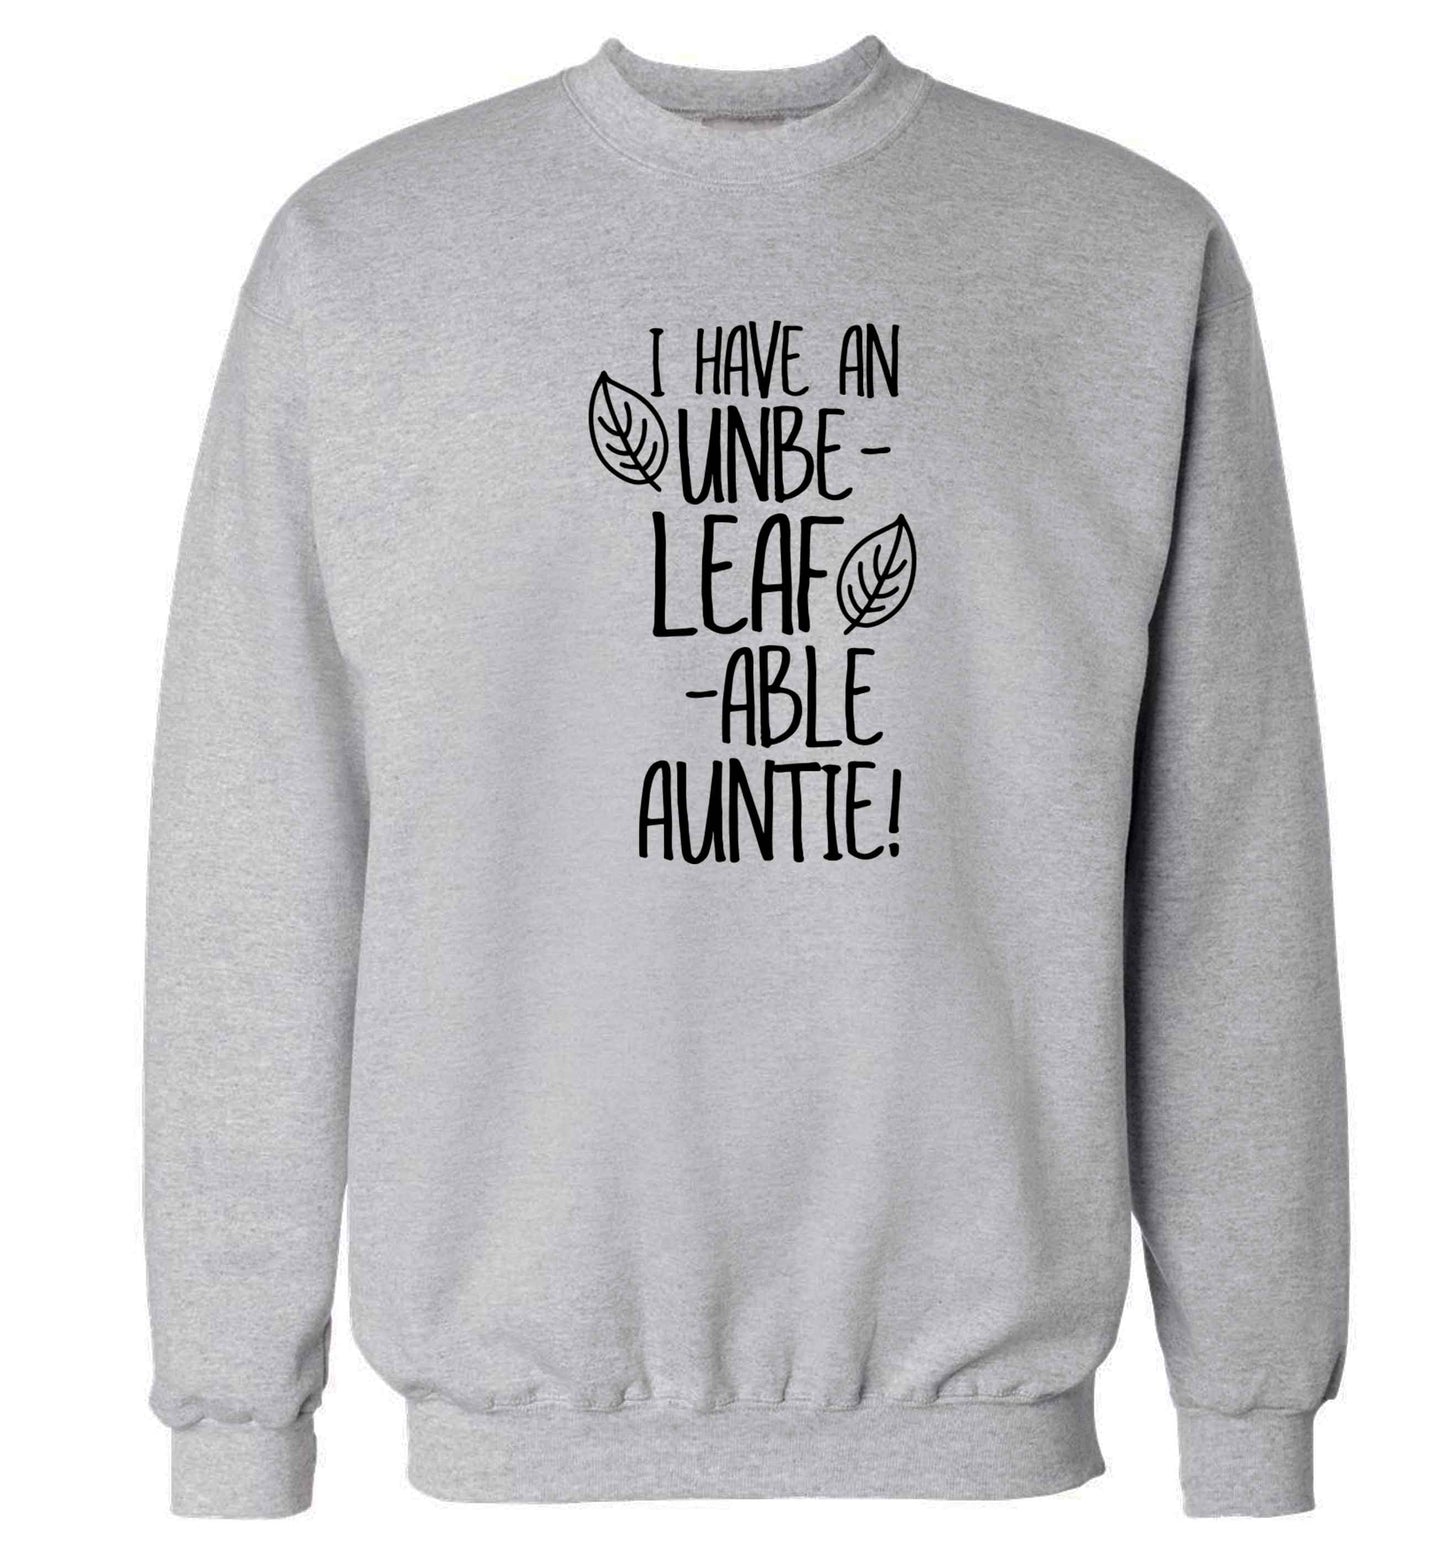 I have an unbe-leaf-able auntie Adult's unisex grey Sweater 2XL